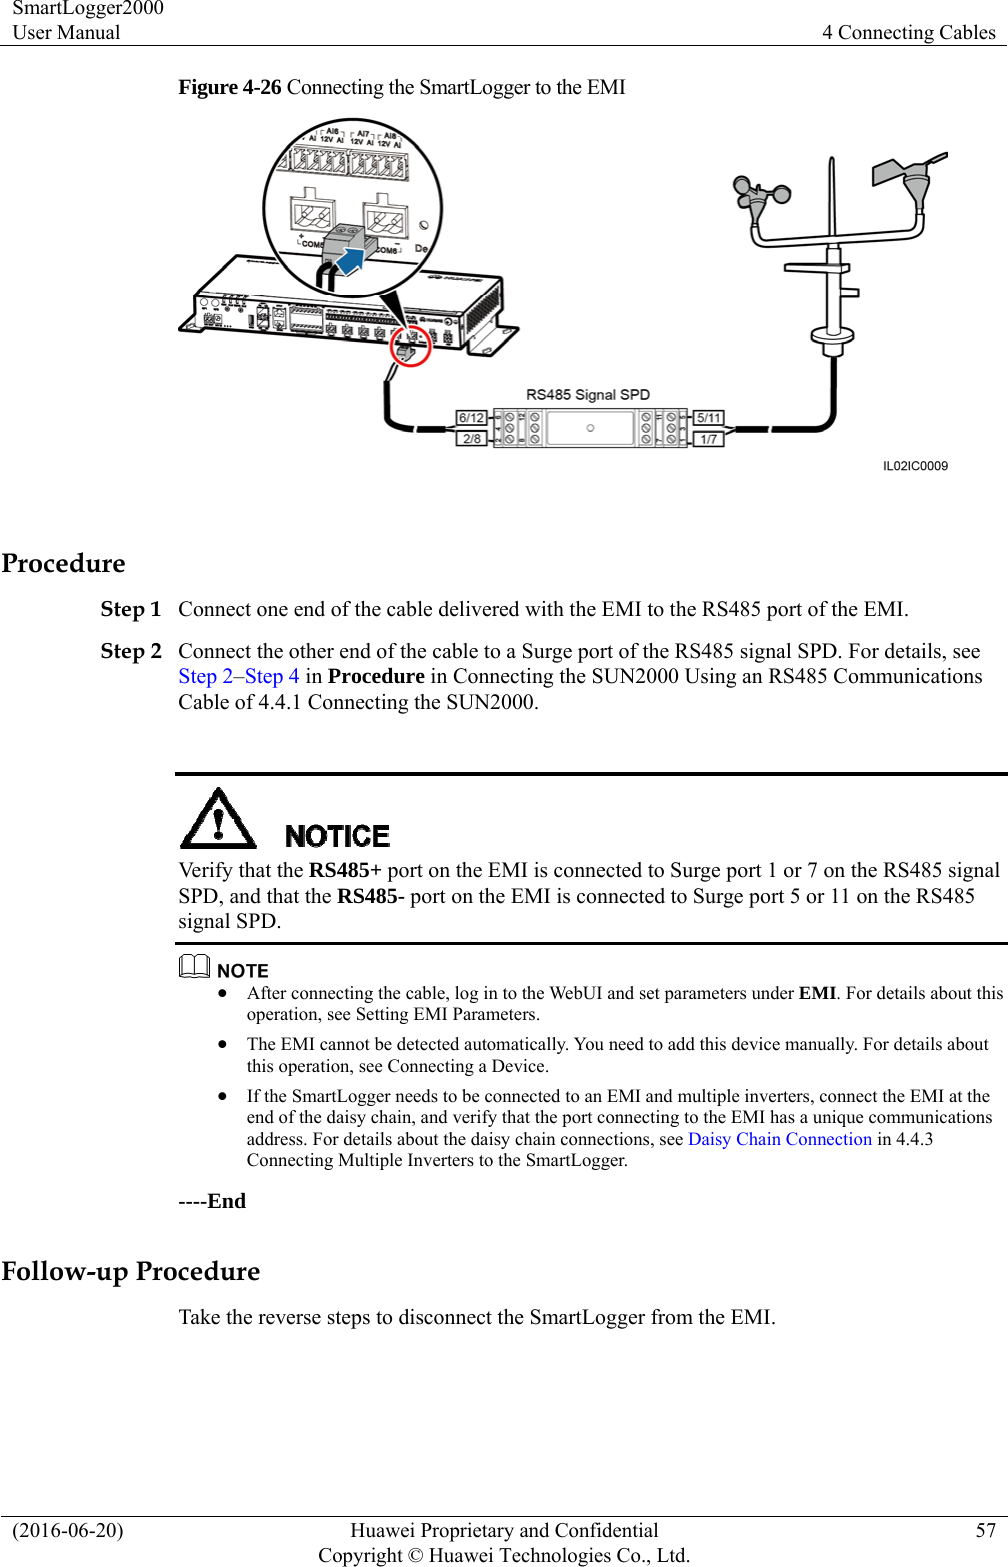 SmartLogger2000 User Manual  4 Connecting Cables (2016-06-20)  Huawei Proprietary and Confidential         Copyright © Huawei Technologies Co., Ltd.57 Figure 4-26 Connecting the SmartLogger to the EMI   Procedure Step 1 Connect one end of the cable delivered with the EMI to the RS485 port of the EMI.   Step 2 Connect the other end of the cable to a Surge port of the RS485 signal SPD. For details, see Step 2–Step 4 in Procedure in Connecting the SUN2000 Using an RS485 Communications Cable of 4.4.1 Connecting the SUN2000.     Verify that the RS485+ port on the EMI is connected to Surge port 1 or 7 on the RS485 signal SPD, and that the RS485- port on the EMI is connected to Surge port 5 or 11 on the RS485 signal SPD.     After connecting the cable, log in to the WebUI and set parameters under EMI. For details about this operation, see Setting EMI Parameters.  The EMI cannot be detected automatically. You need to add this device manually. For details about this operation, see Connecting a Device.  If the SmartLogger needs to be connected to an EMI and multiple inverters, connect the EMI at the end of the daisy chain, and verify that the port connecting to the EMI has a unique communications address. For details about the daisy chain connections, see Daisy Chain Connection in 4.4.3 Connecting Multiple Inverters to the SmartLogger.   ----End Follow-up Procedure Take the reverse steps to disconnect the SmartLogger from the EMI. 